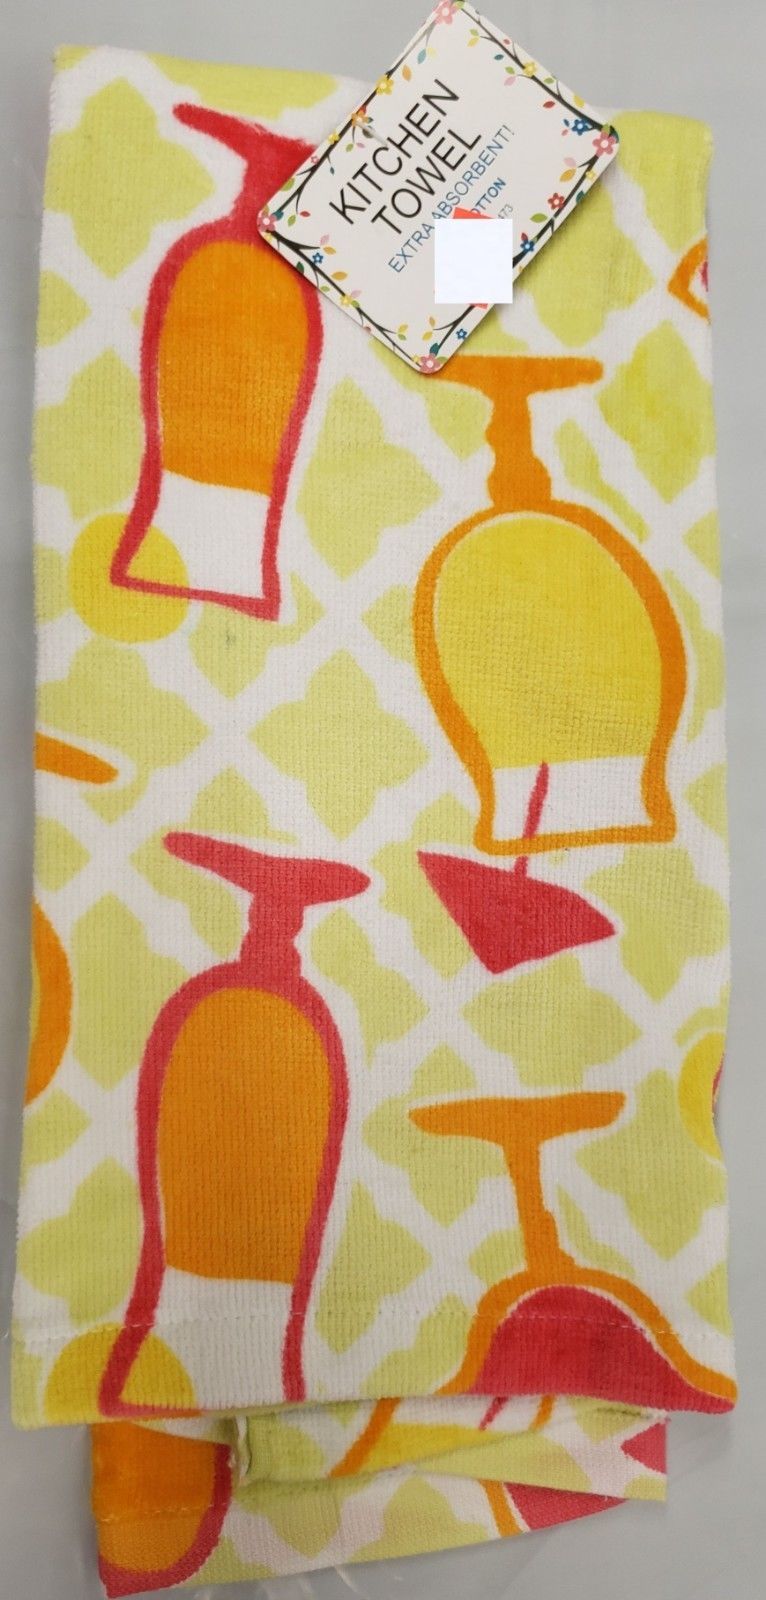 Primary image for 1 PRINTED KITCHEN TOWEL (15" x 25") COCKTAIL GLASSES ON YELLOW & WHITE by AM